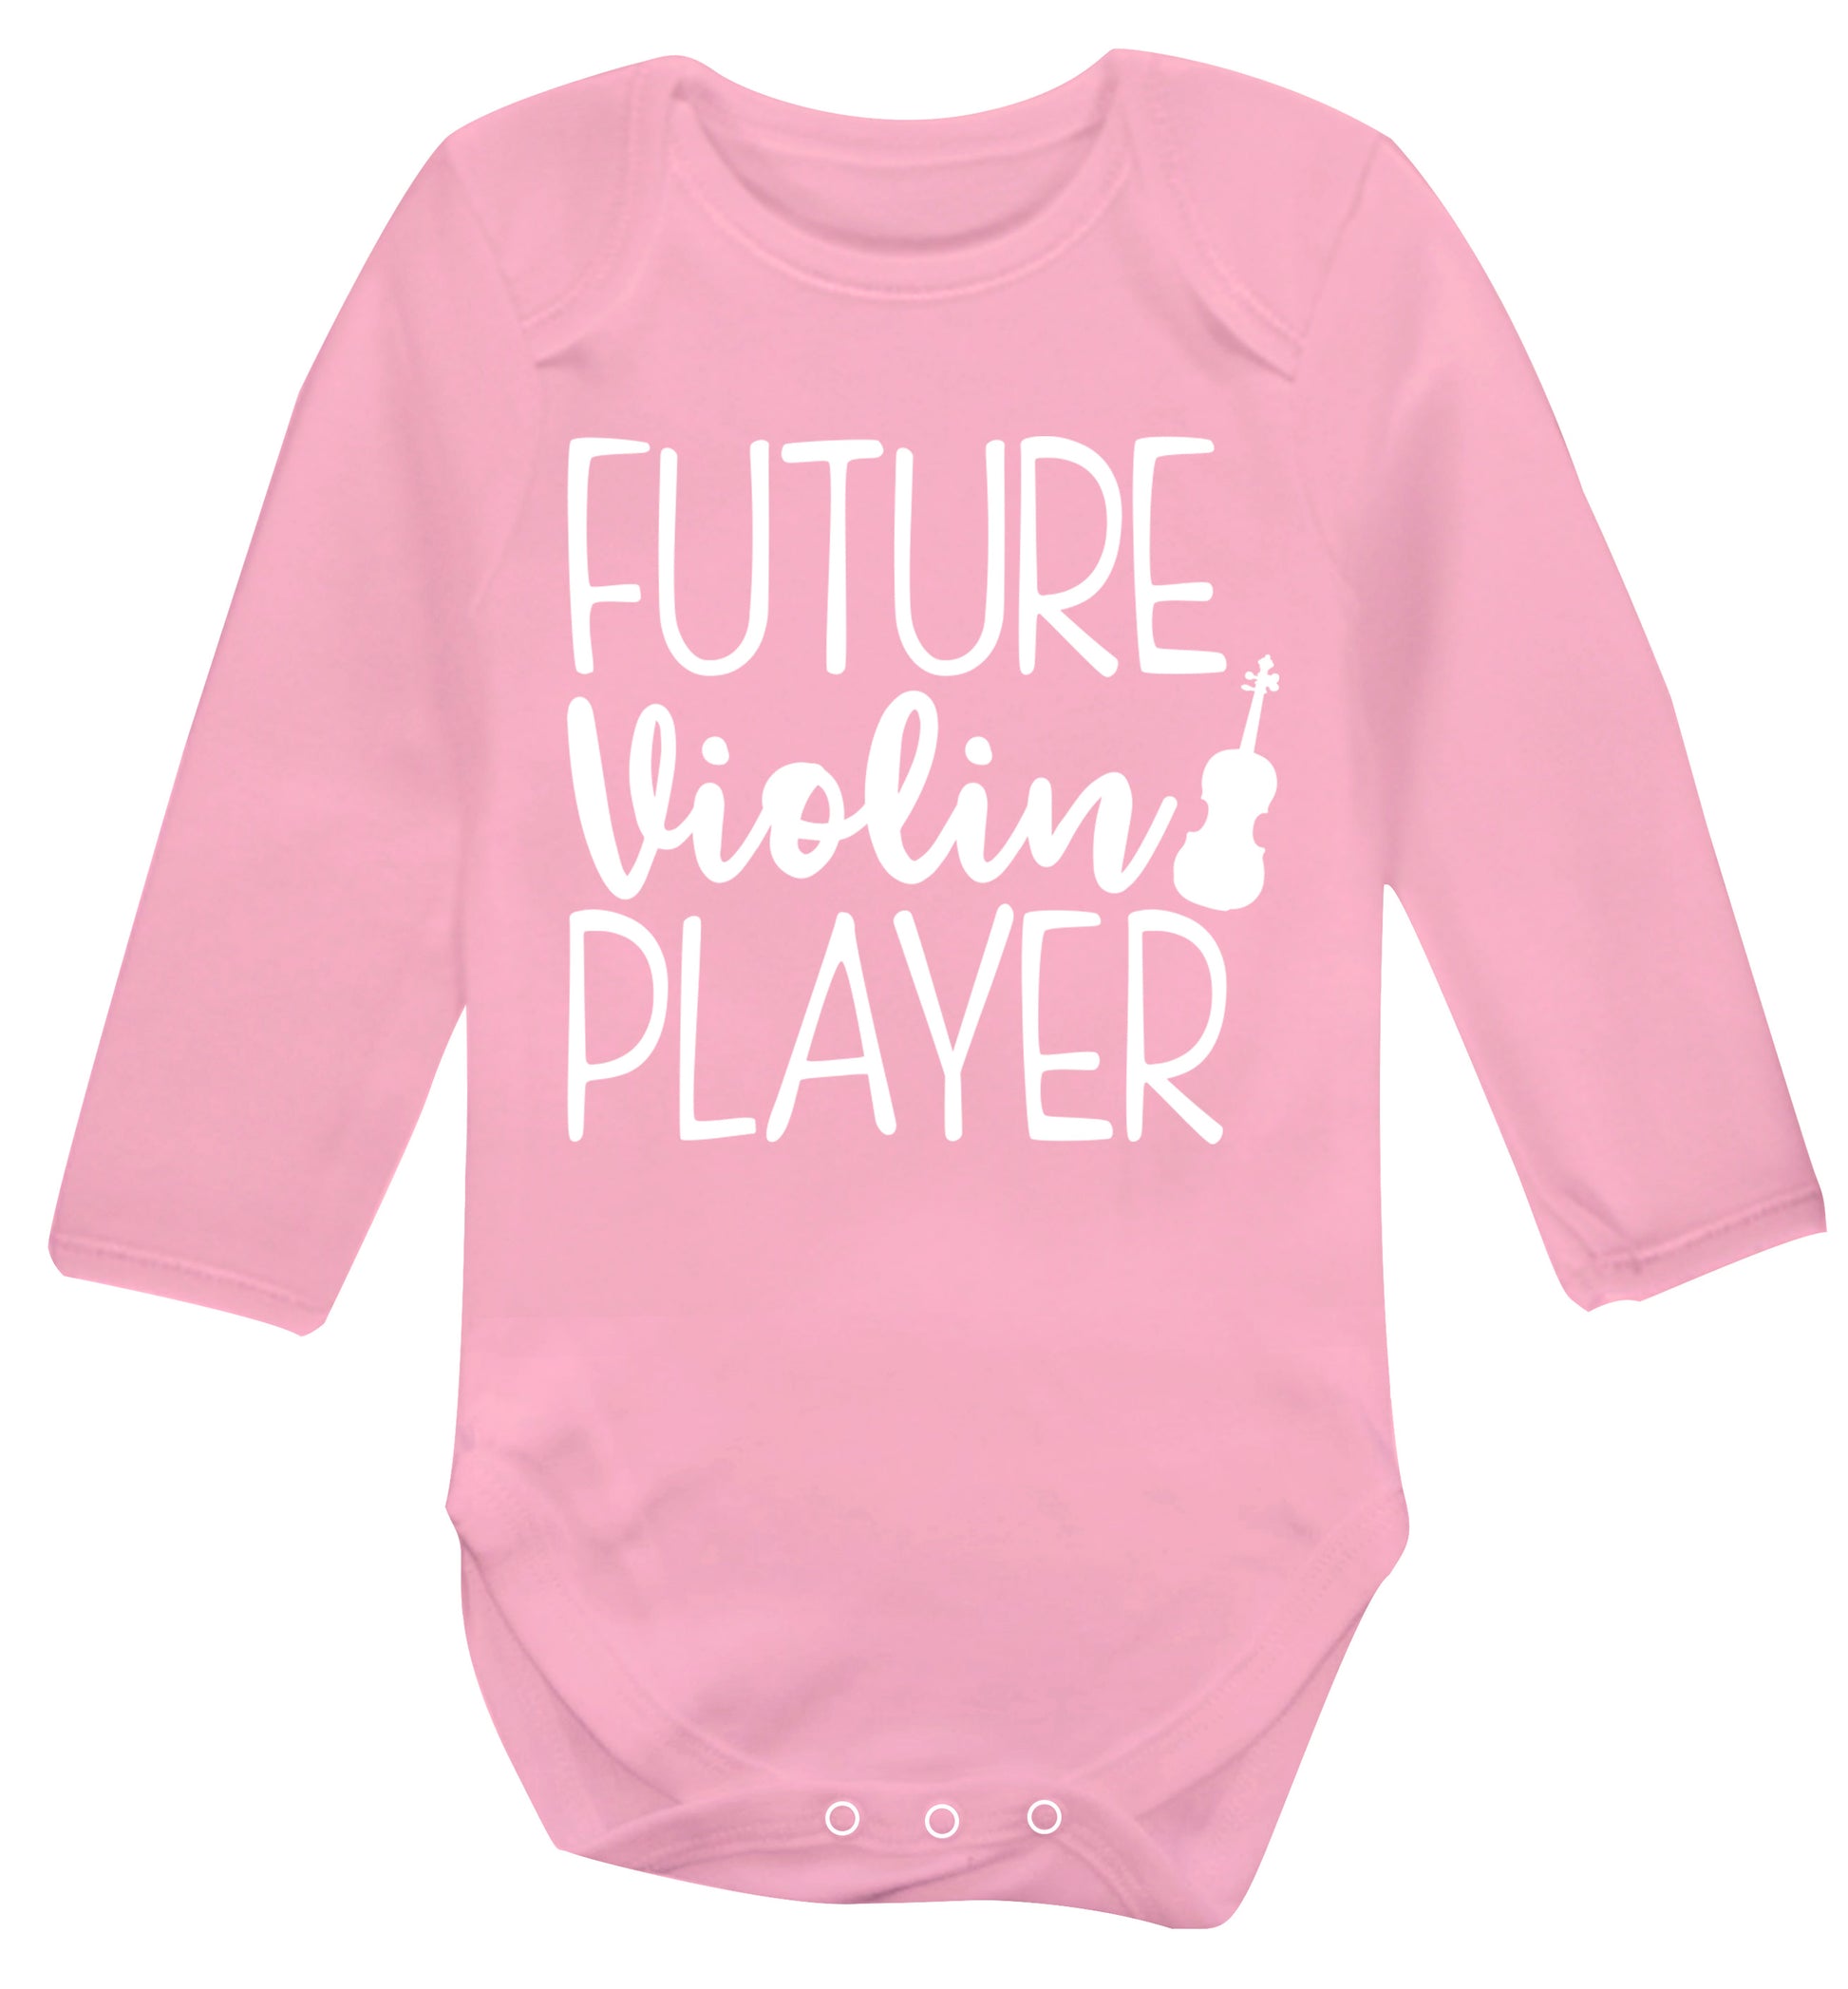 Future Violin Player Baby Vest long sleeved pale pink 6-12 months